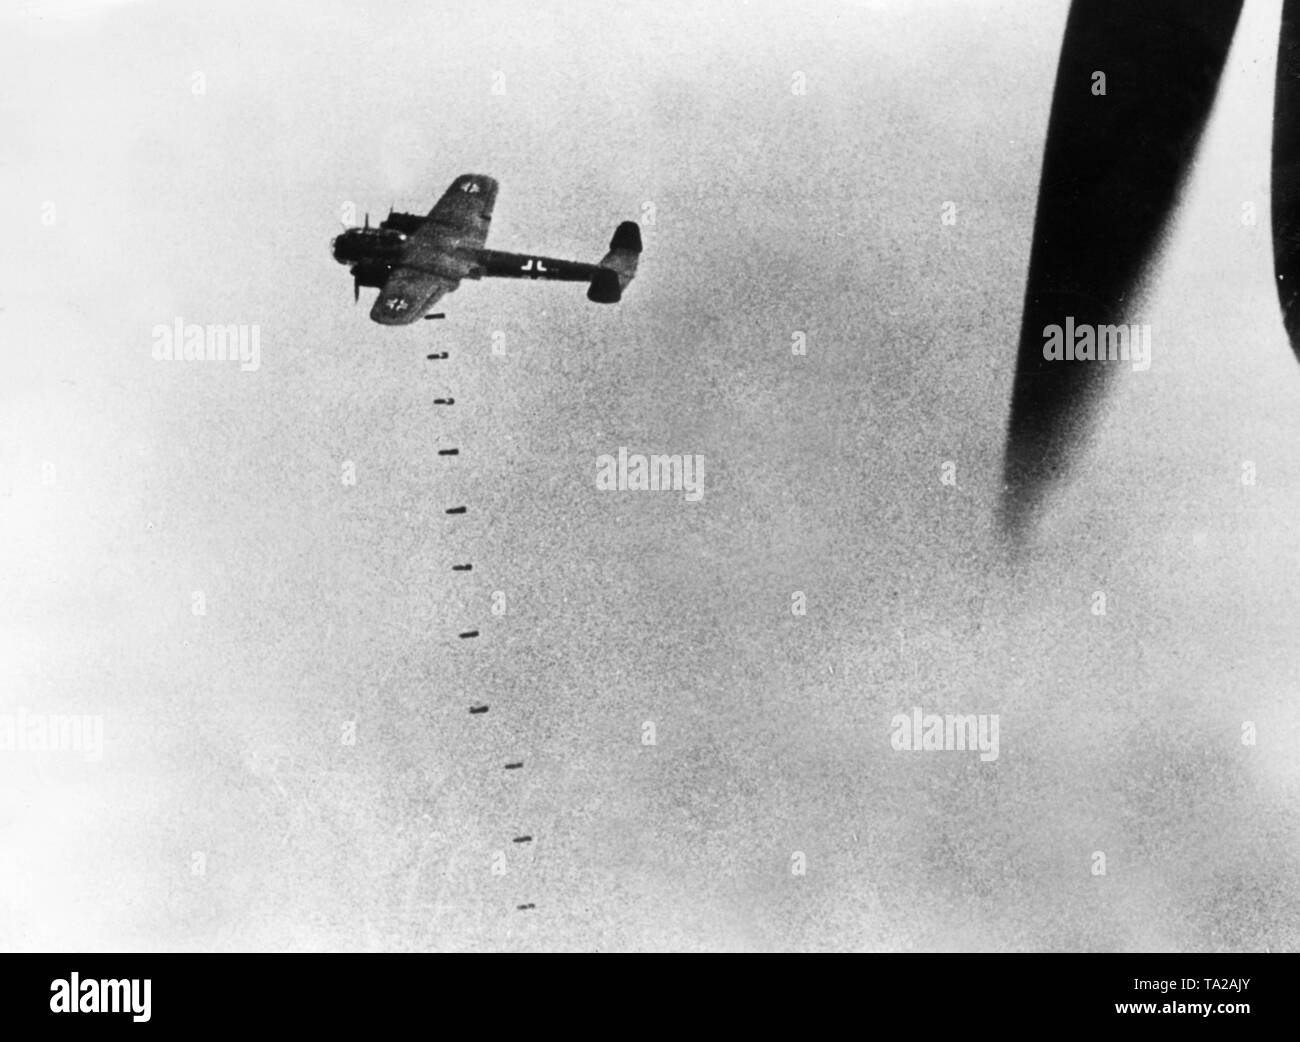 Dornier Do 17 combat aircraft when bombing during an attack on London. Stock Photo